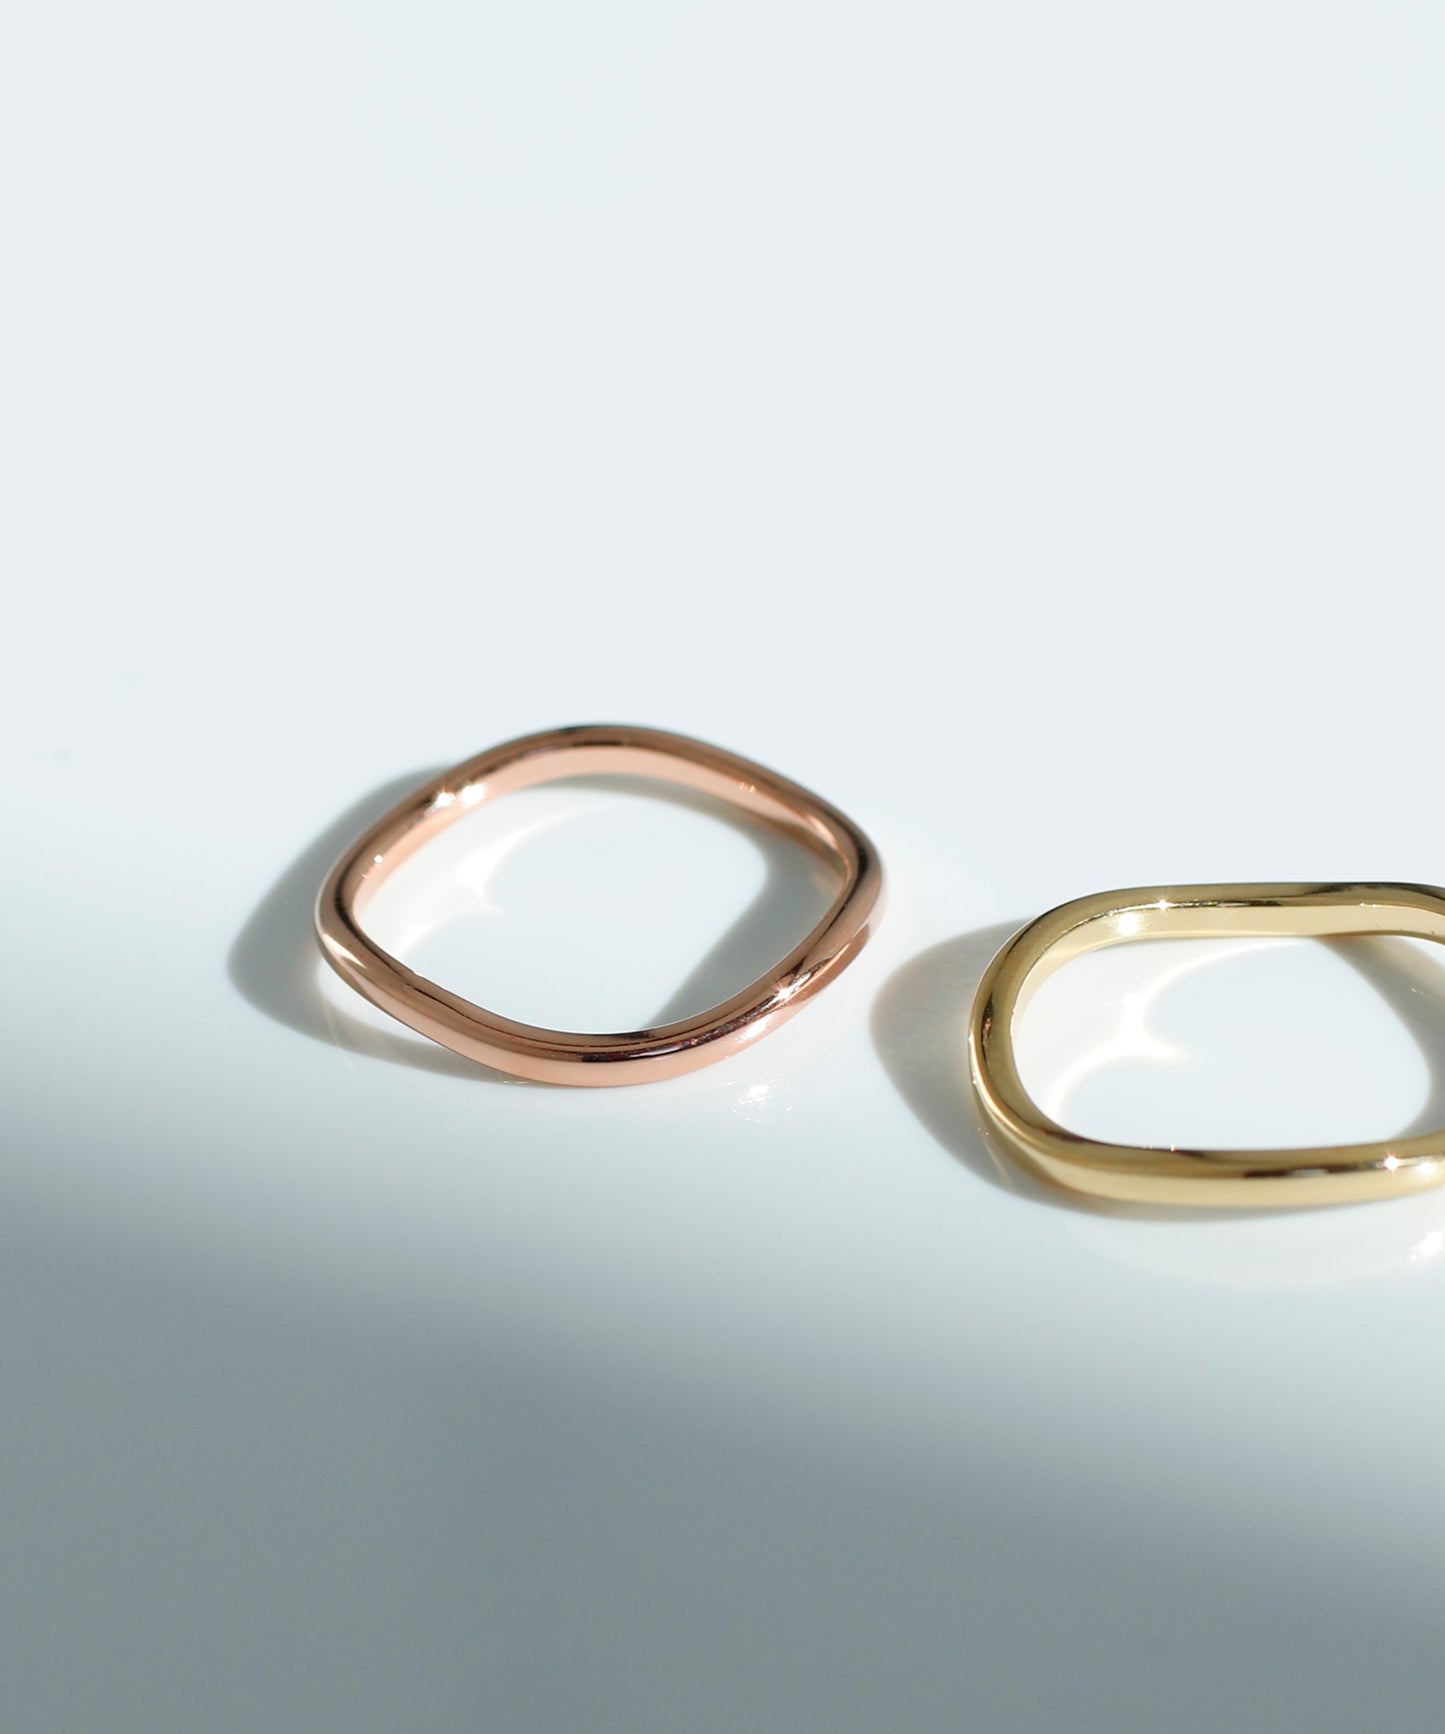 【Stainless Seel IP】Nuance Line Ring